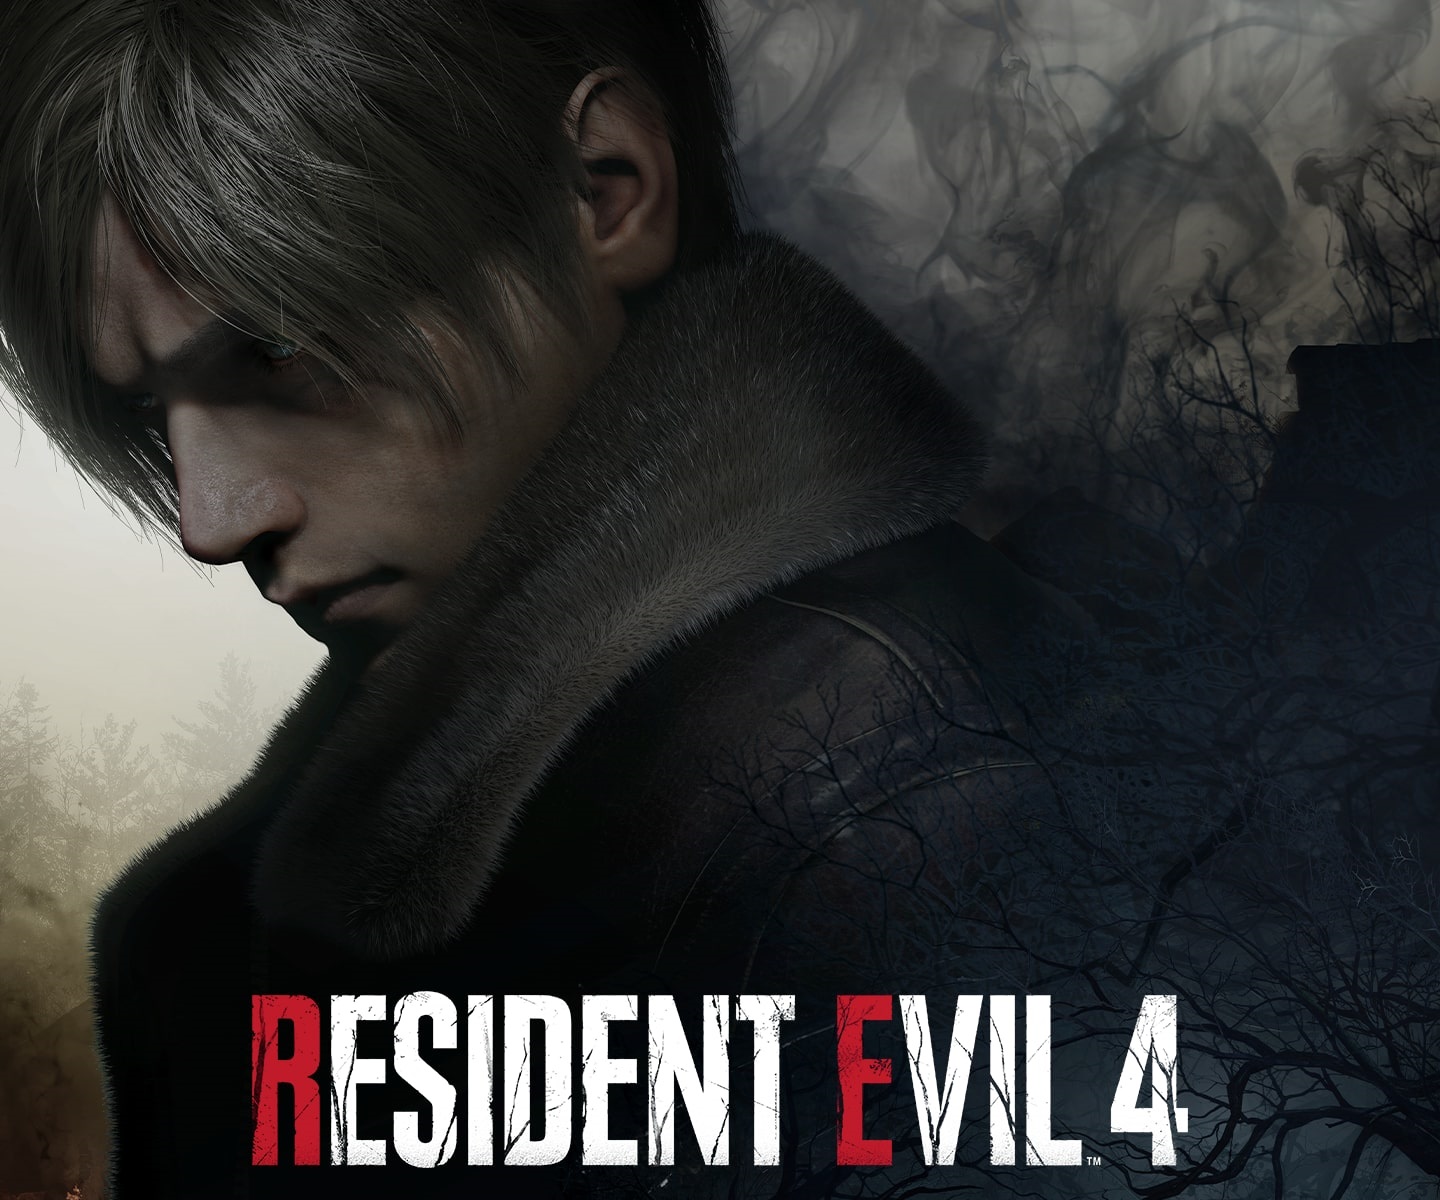 Resident Evil 4 System Requirements: Can You Run It?